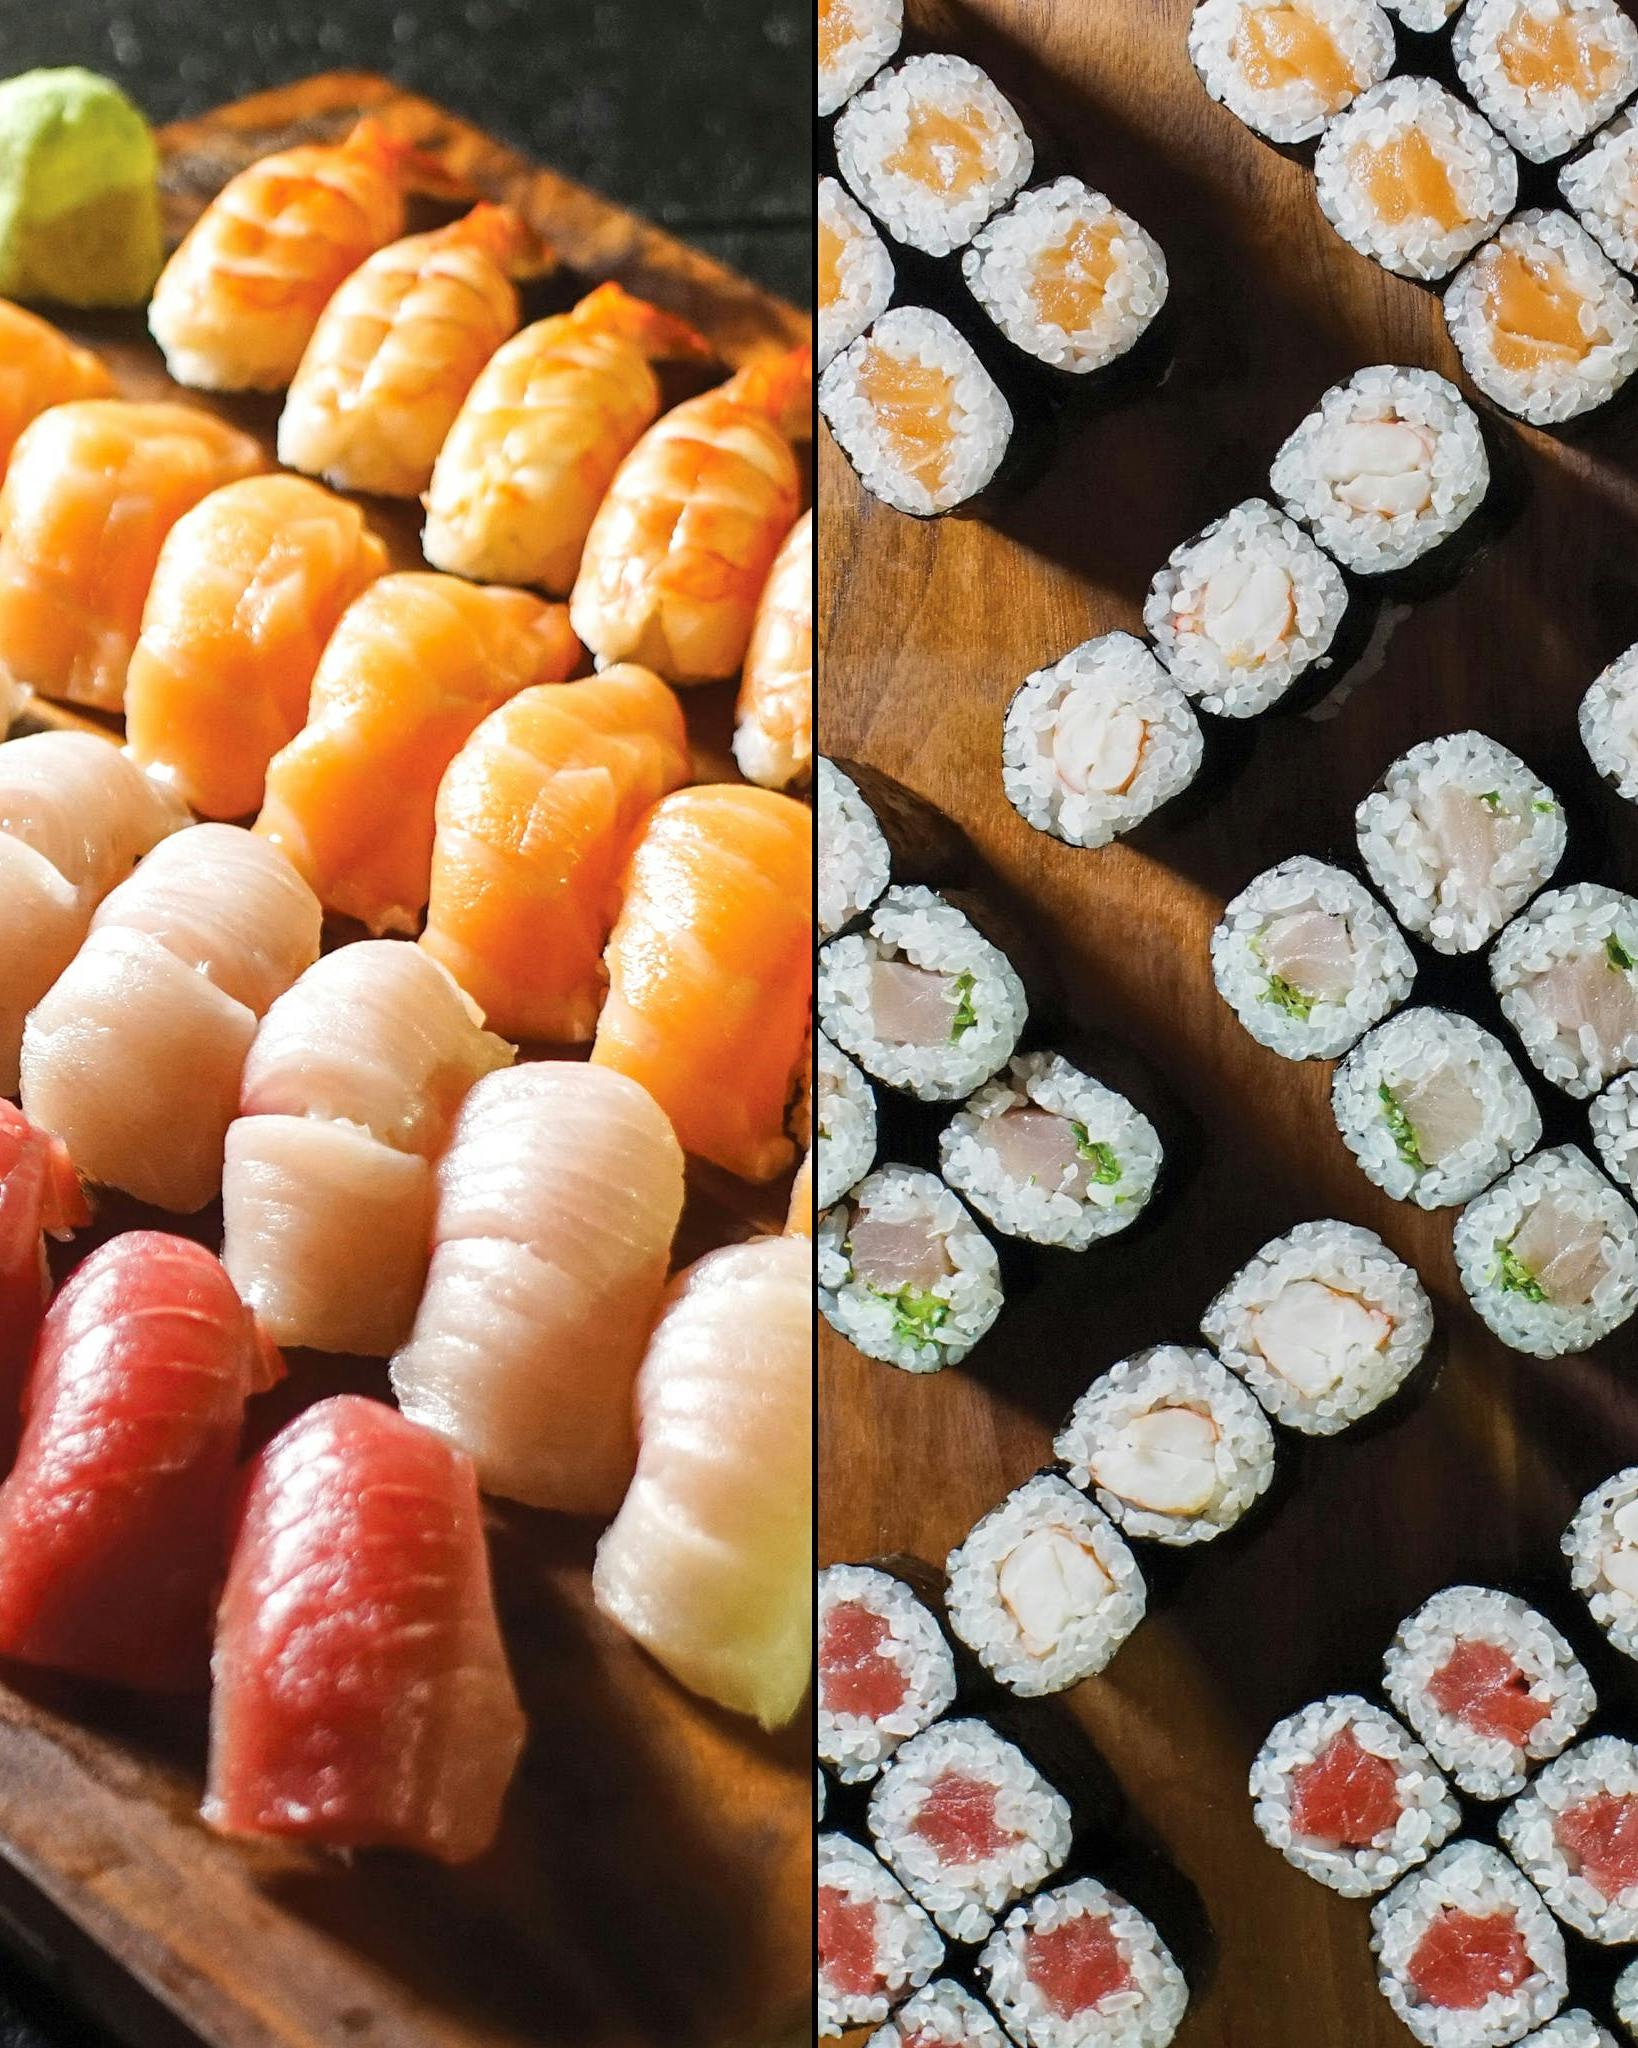 Buy Sushi Kit Online at the Best Price, Free UK Delivery - Bradley's Fish